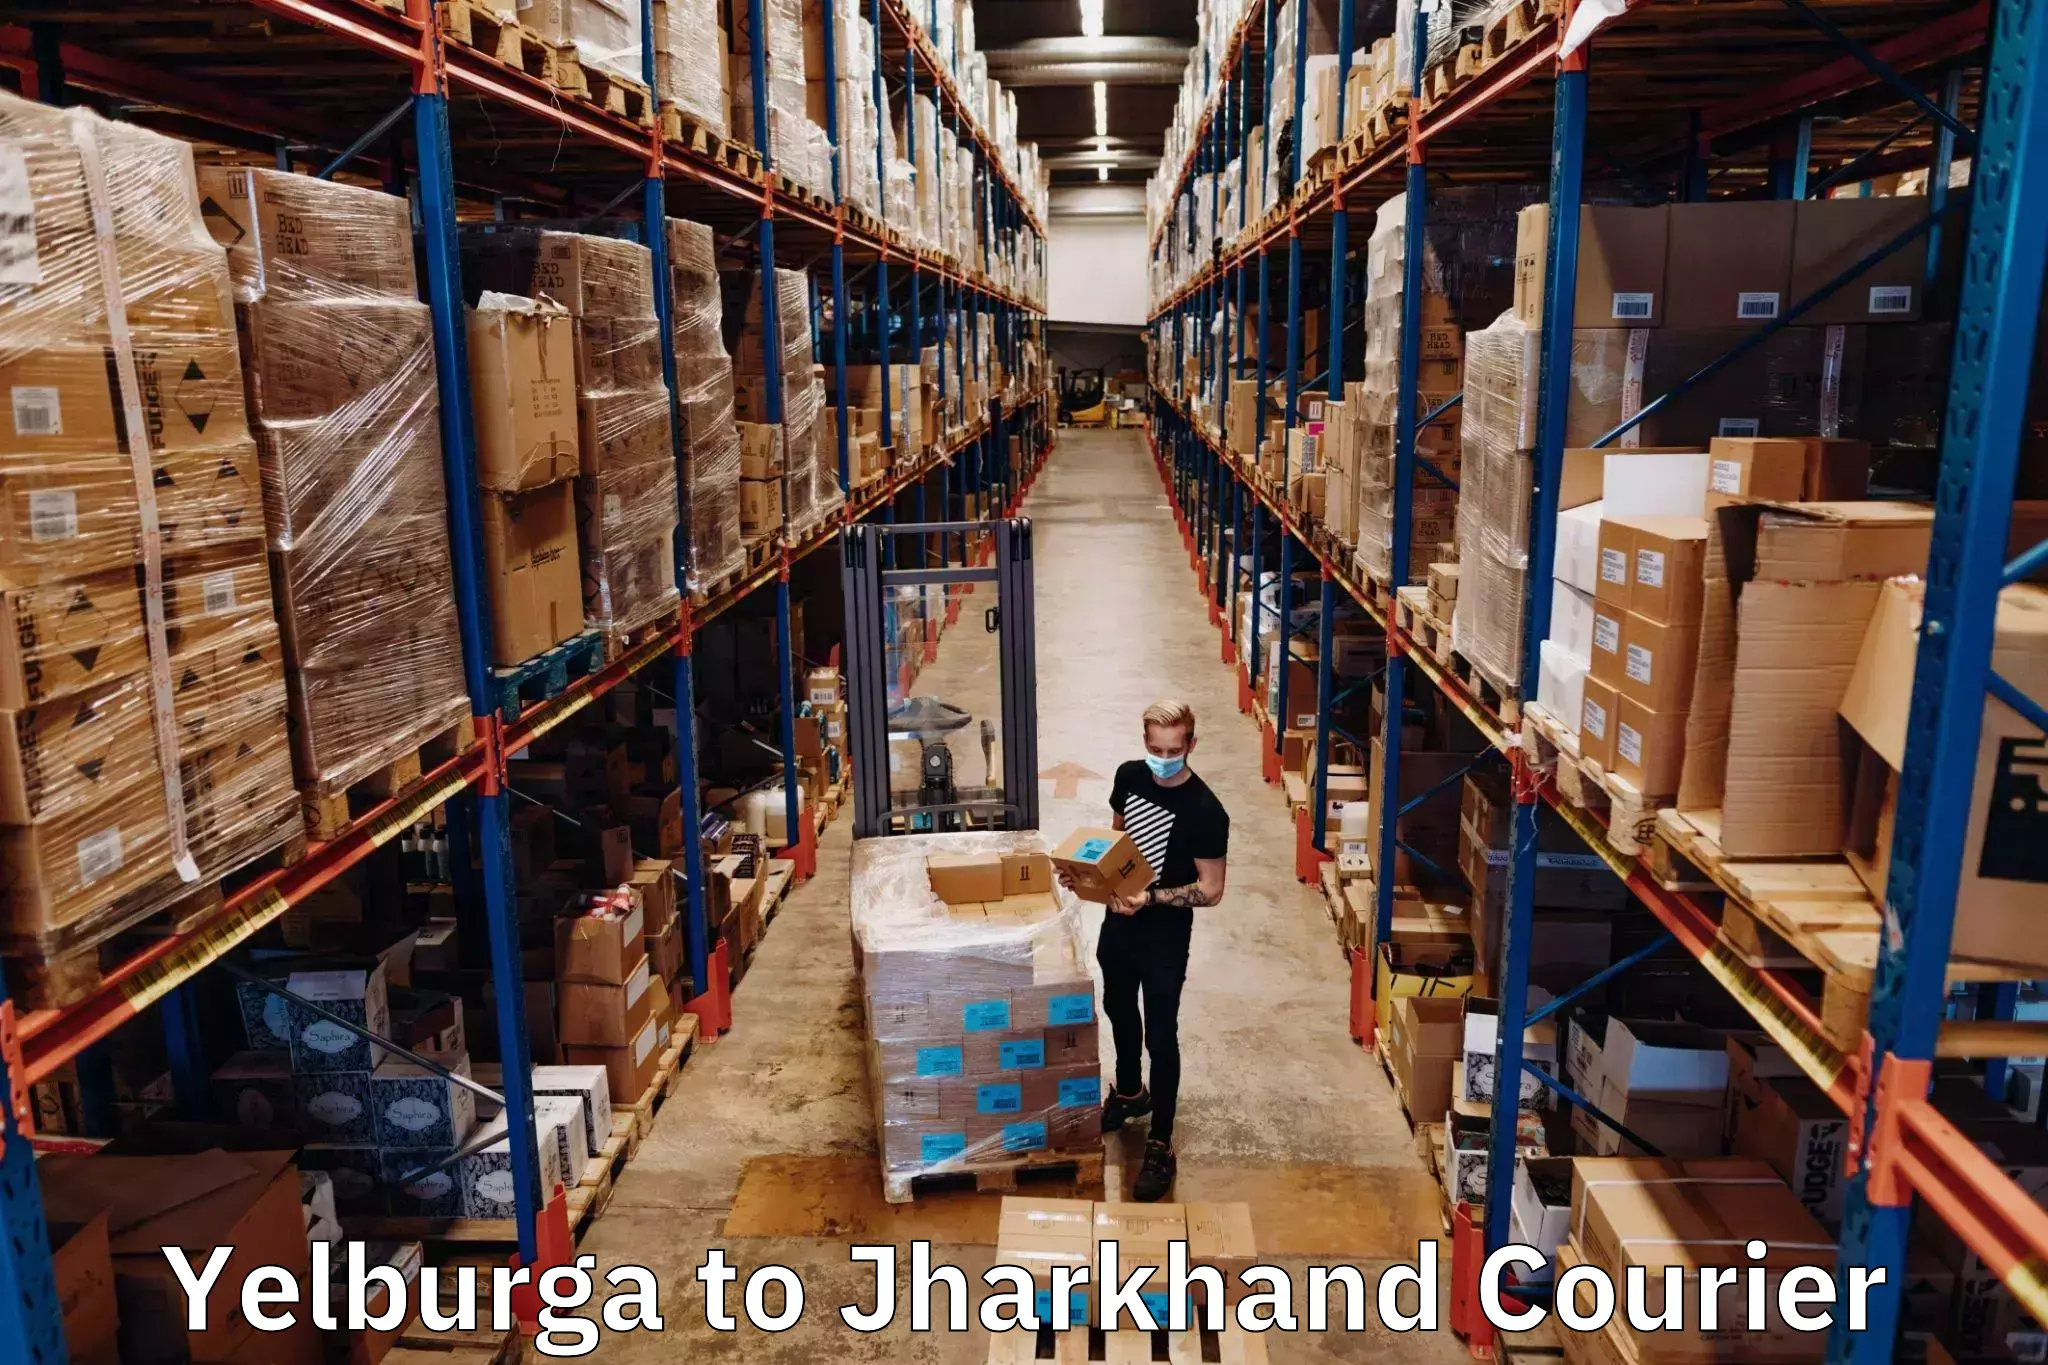 Next-day delivery options in Yelburga to Jharkhand